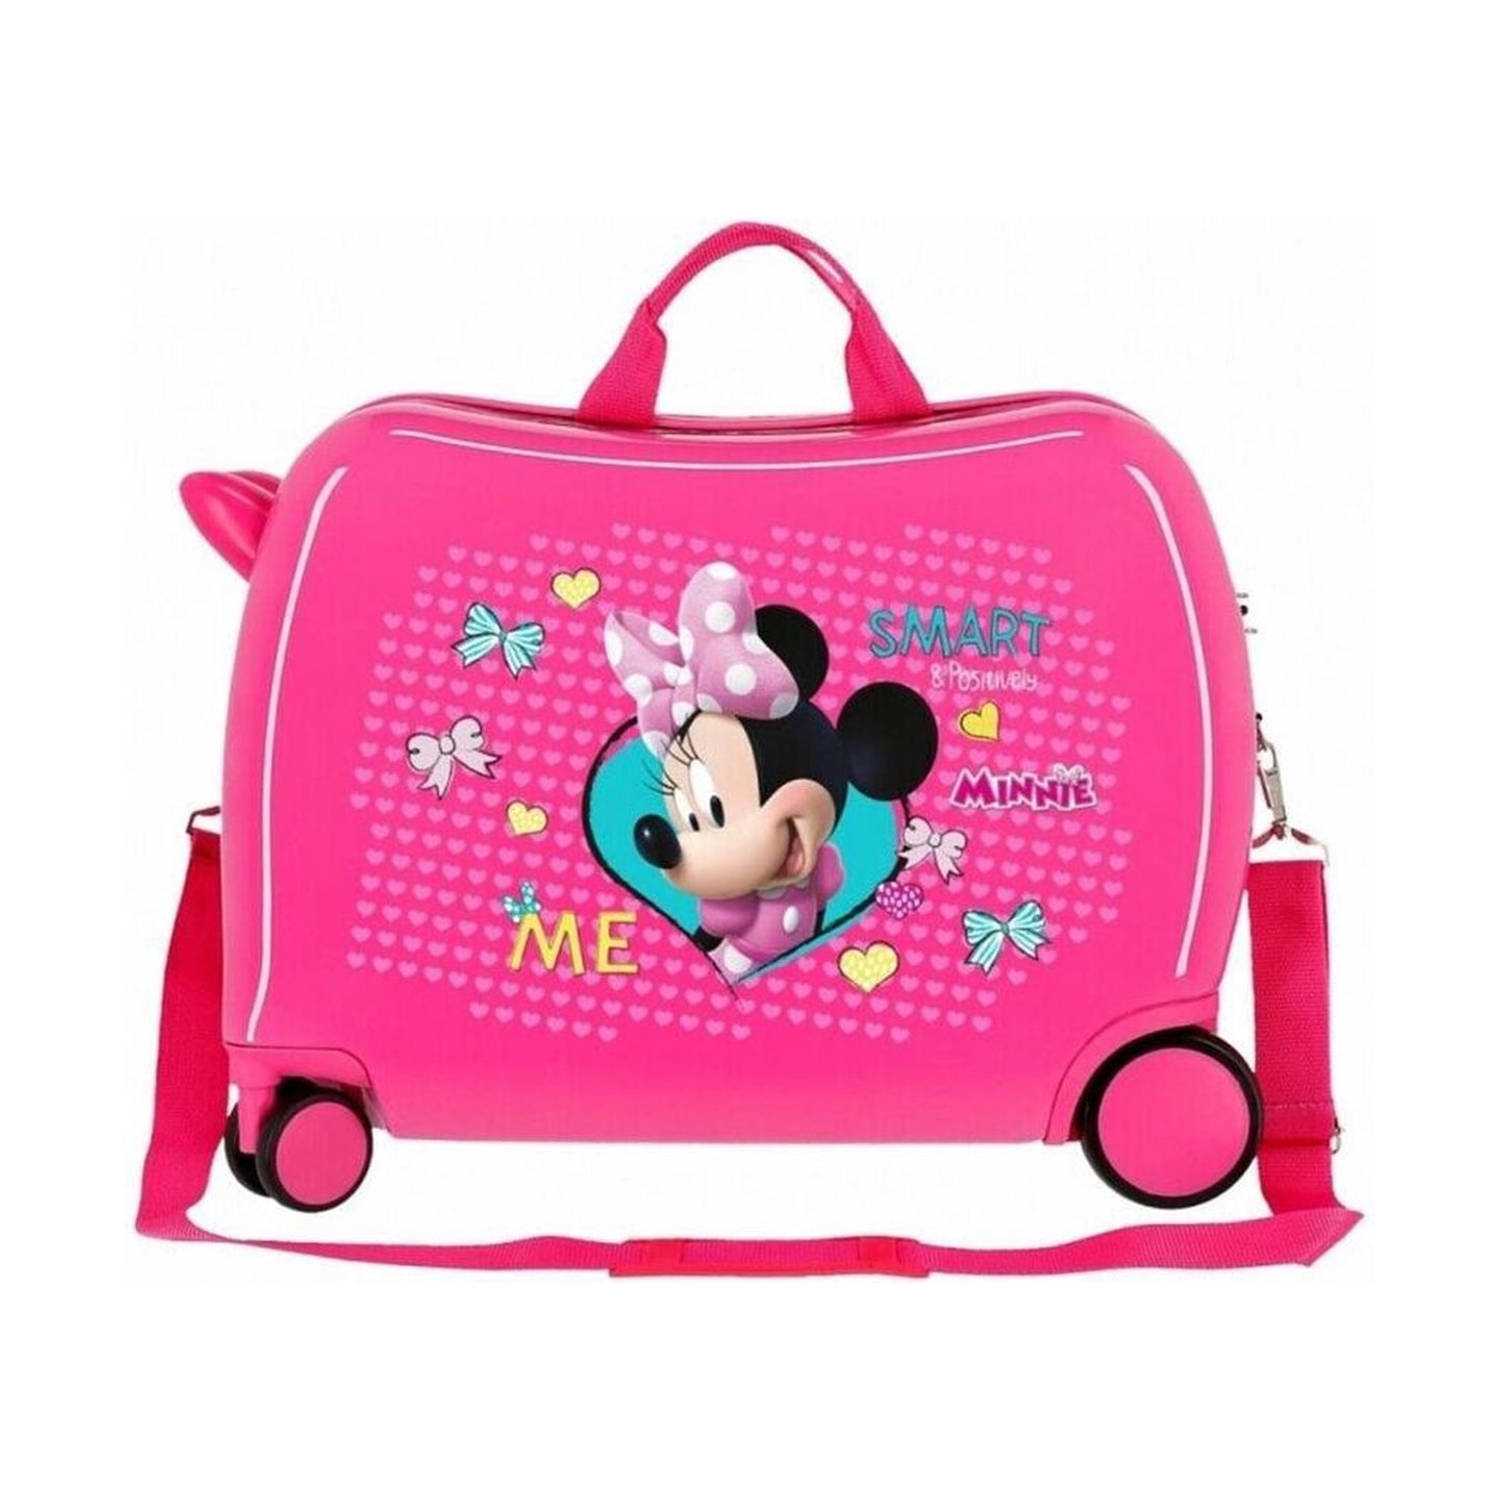 Disney Rolling Suitcase 4 Wheels Minnie Mouse Happy Helpers